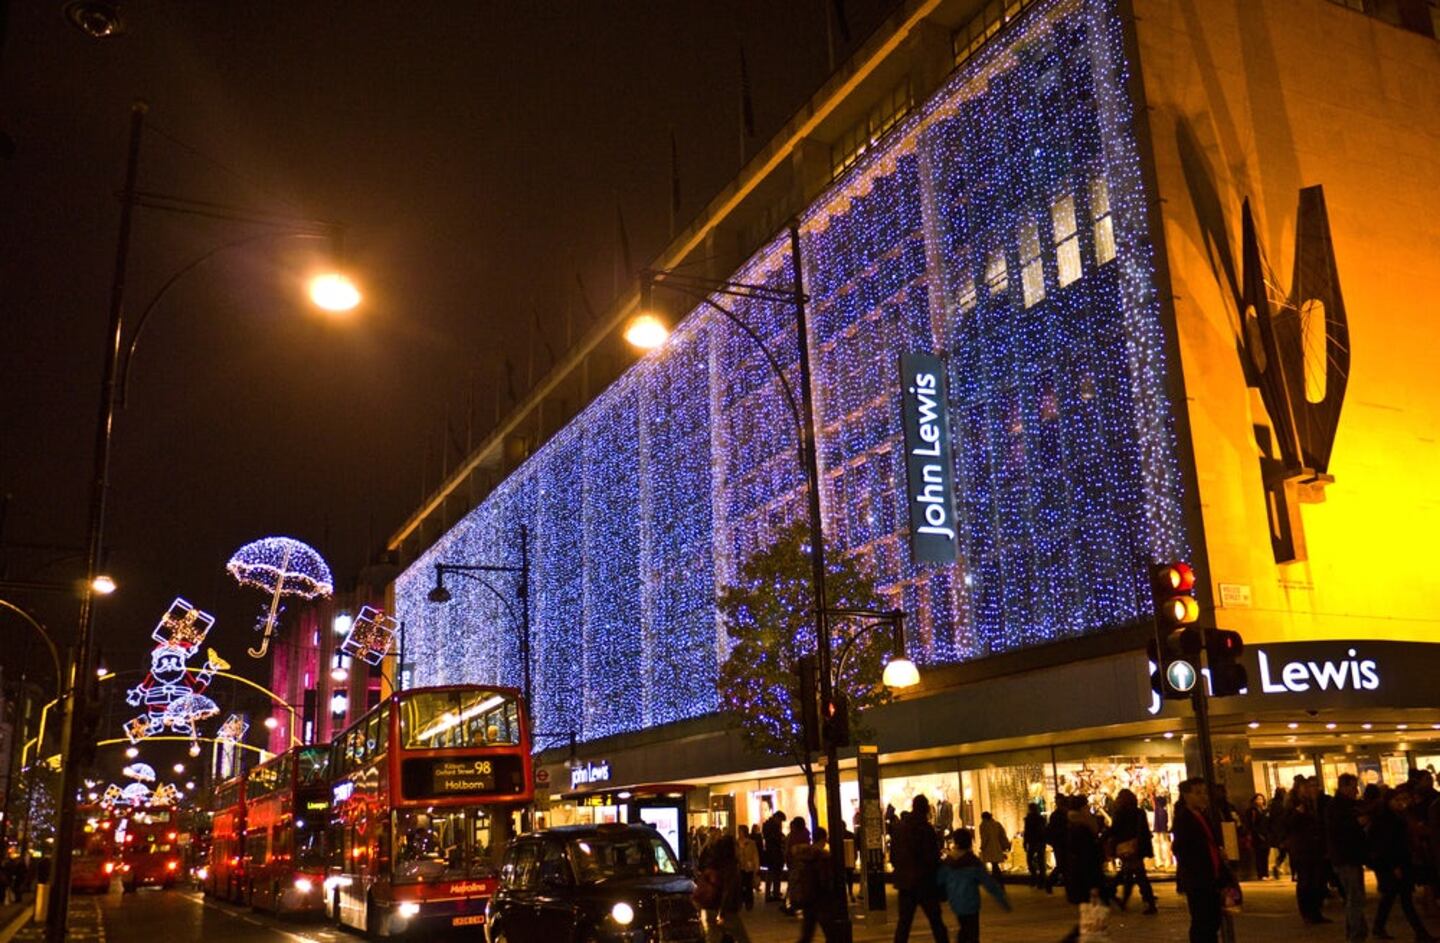 A John Lewis department store is lit up at night with holiday lights.